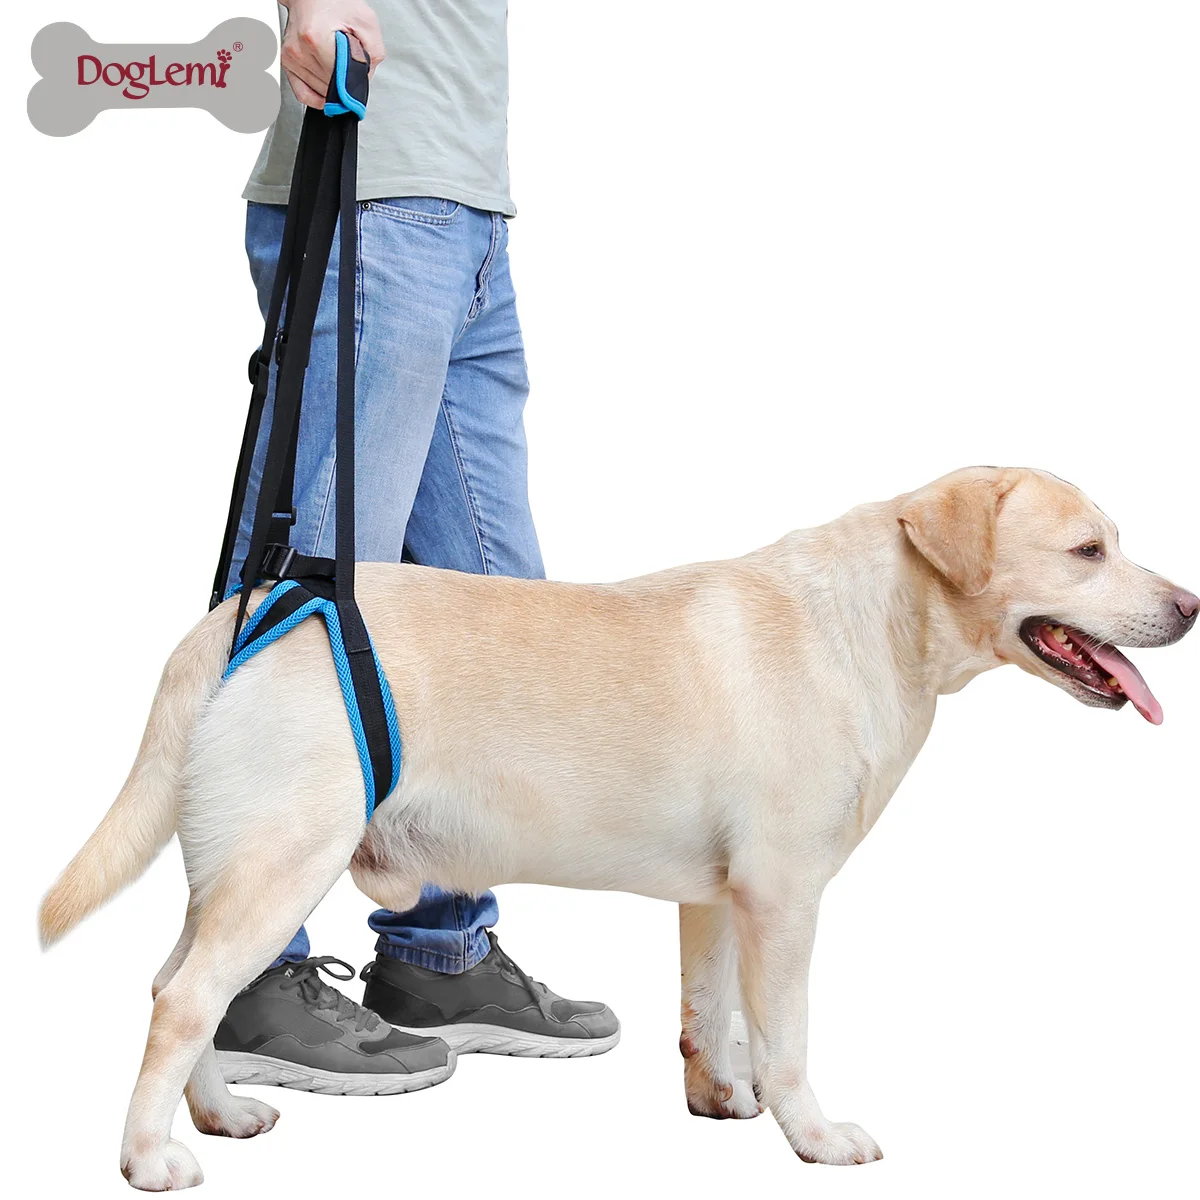 Old Dogs Balance Support Belt Dog Hind Legs Auxiliary Belt for Recovery Disability Leg Brace Hind Leg Help Walking Harness